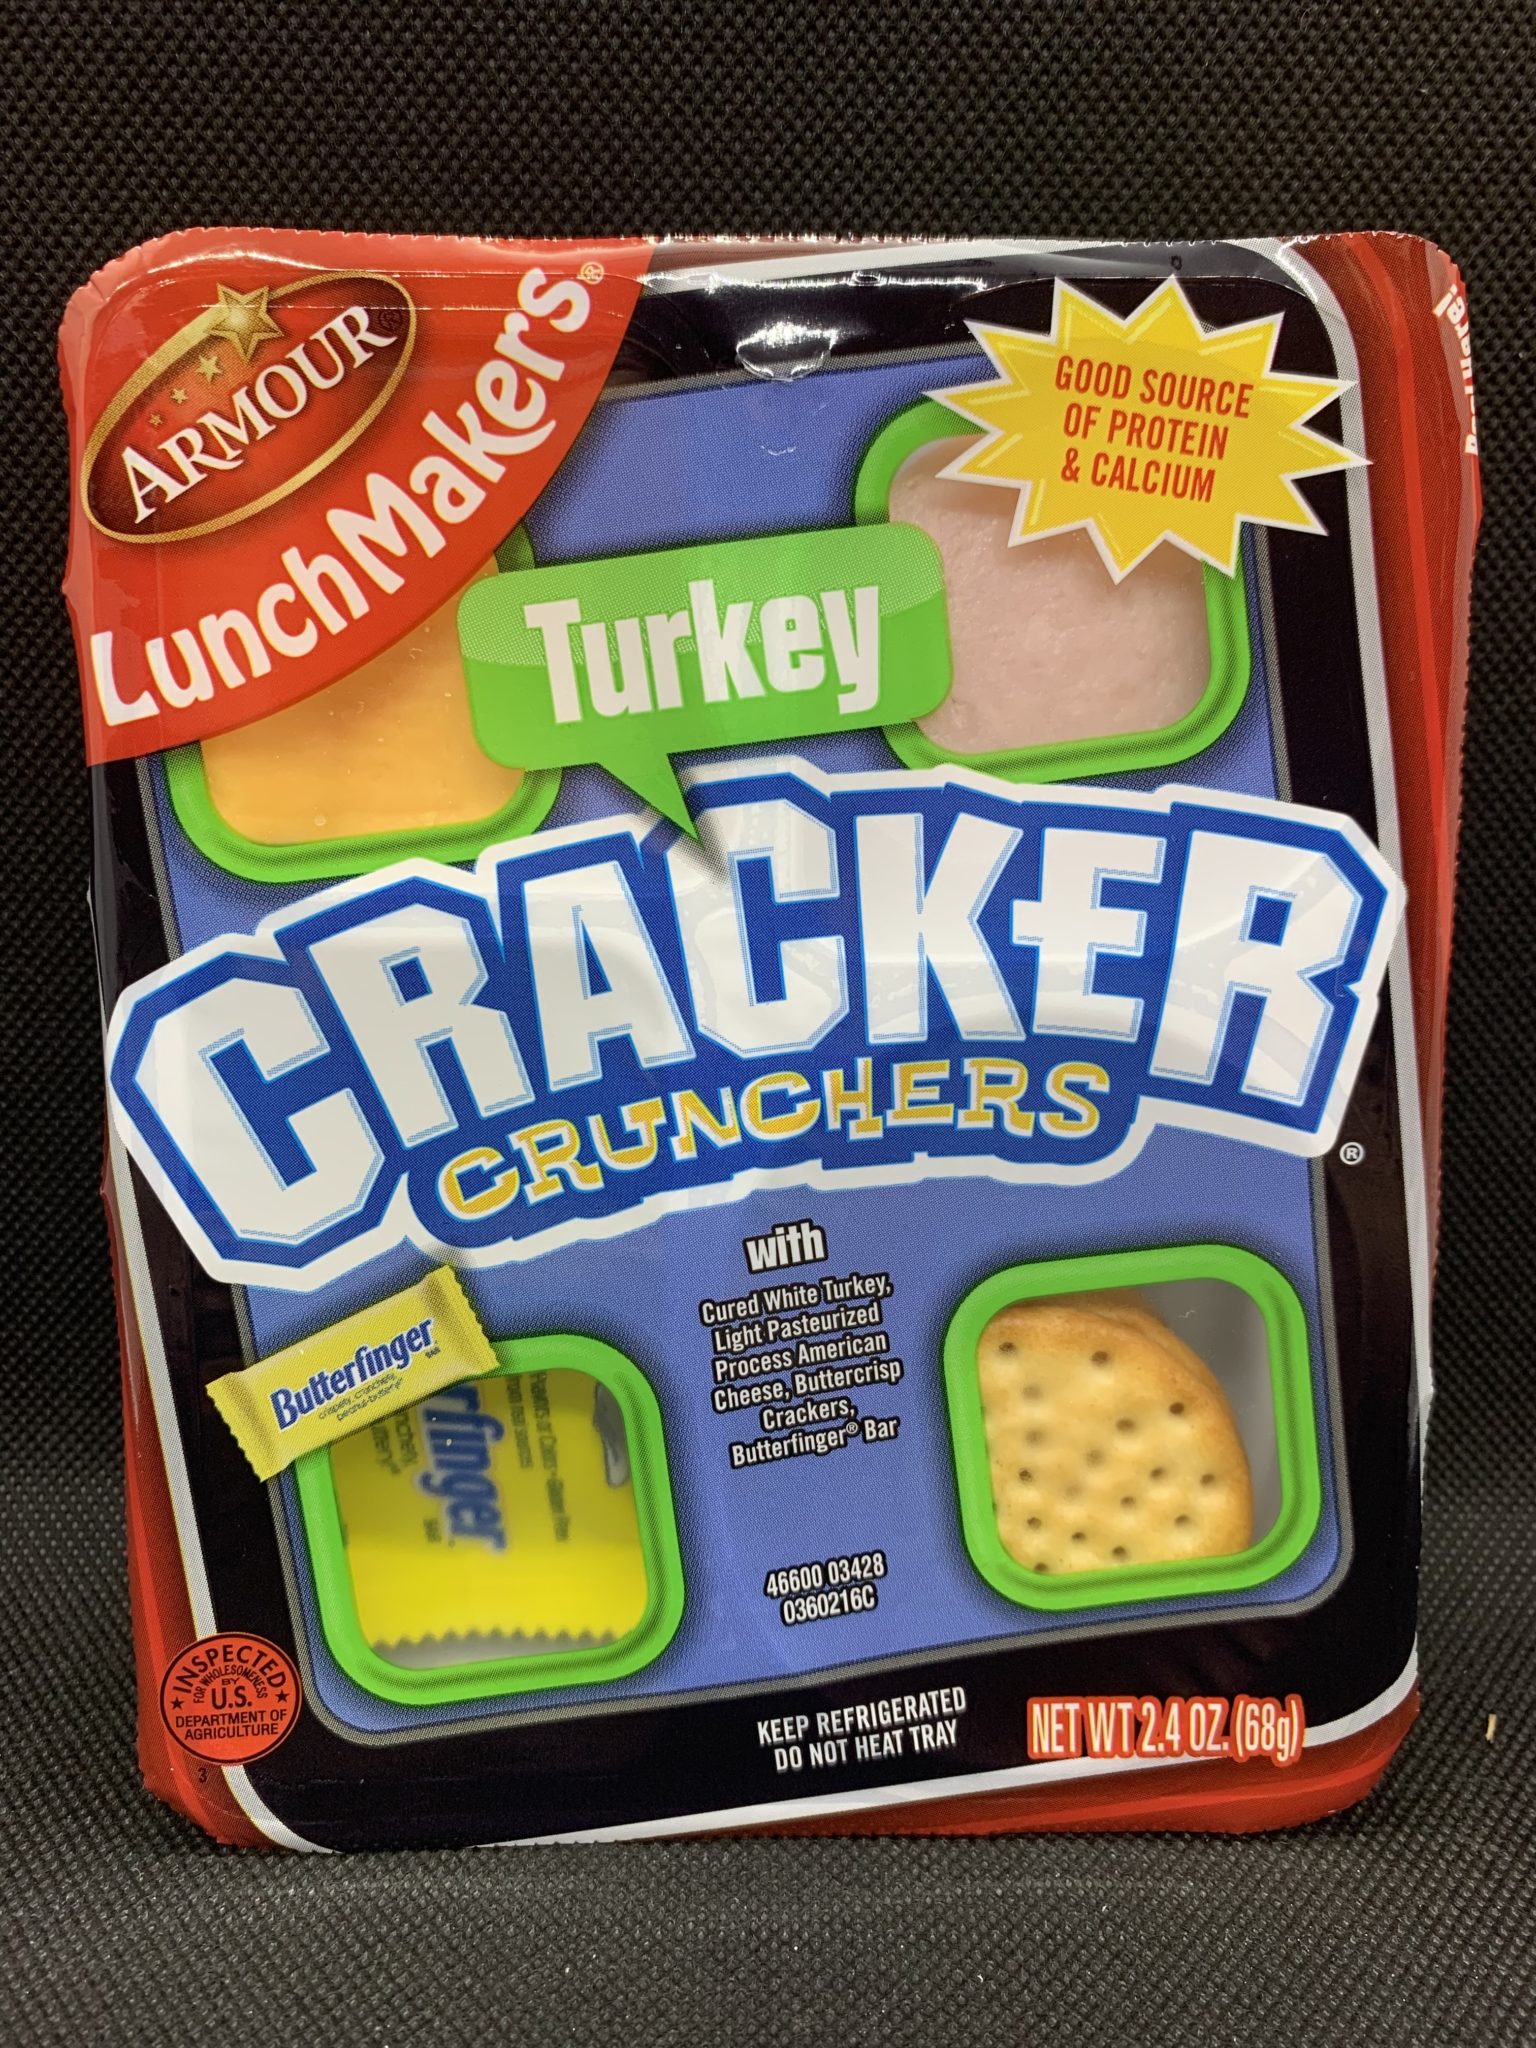 Off Brand Lunchables Save 50 With Armour Lunchmakers The Off Brand Guy